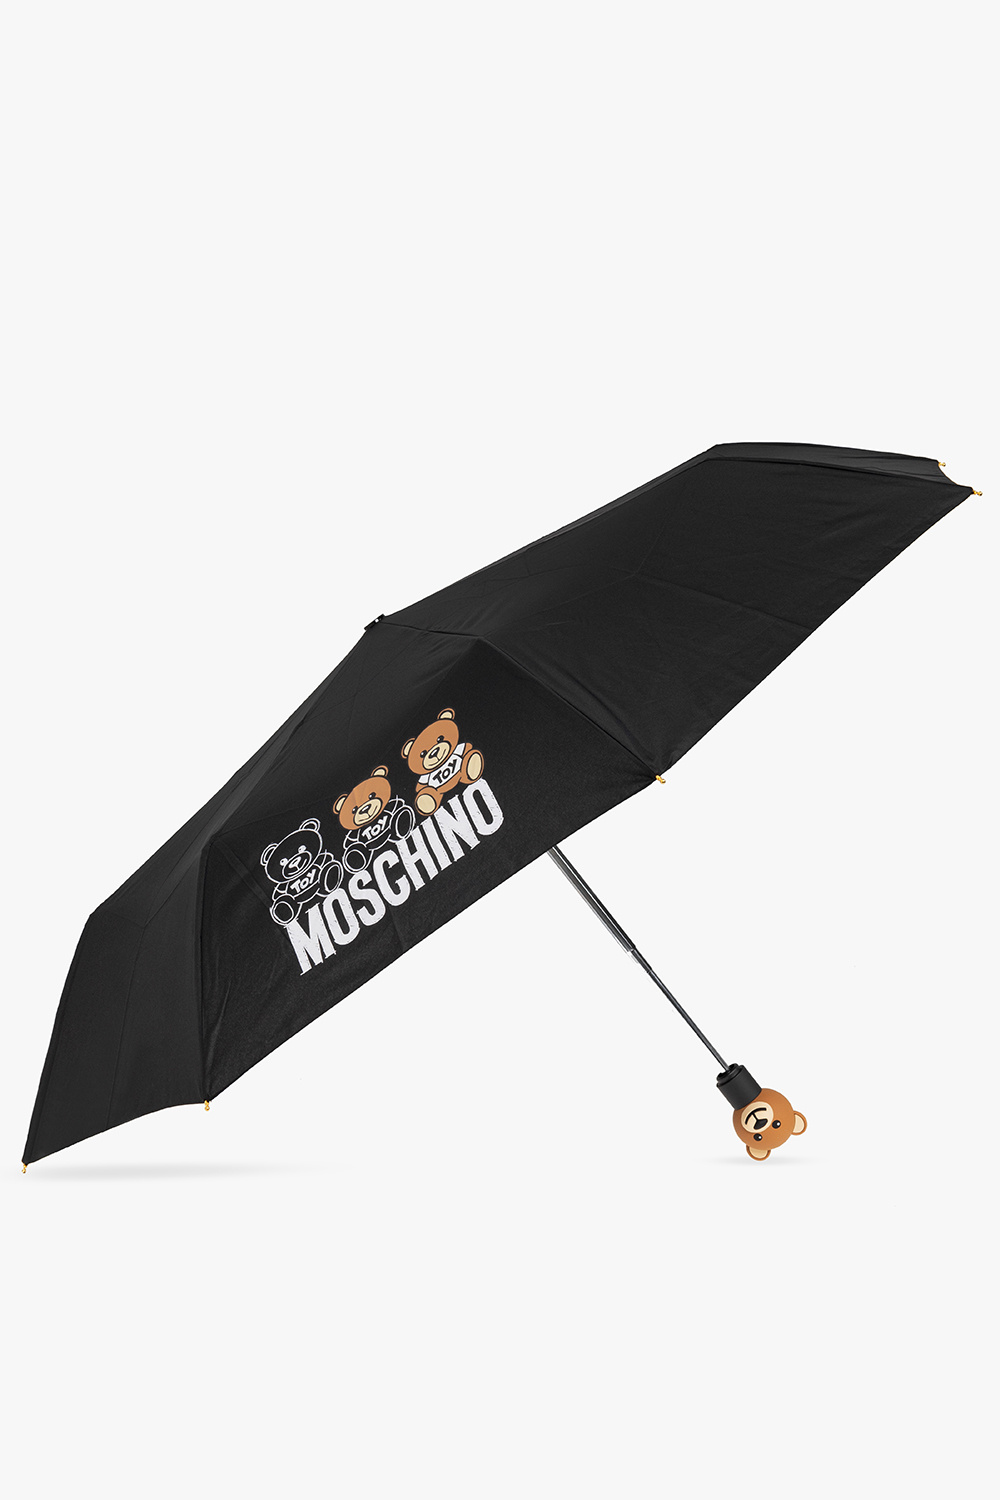 Moschino for the perfect Christmas tree gift